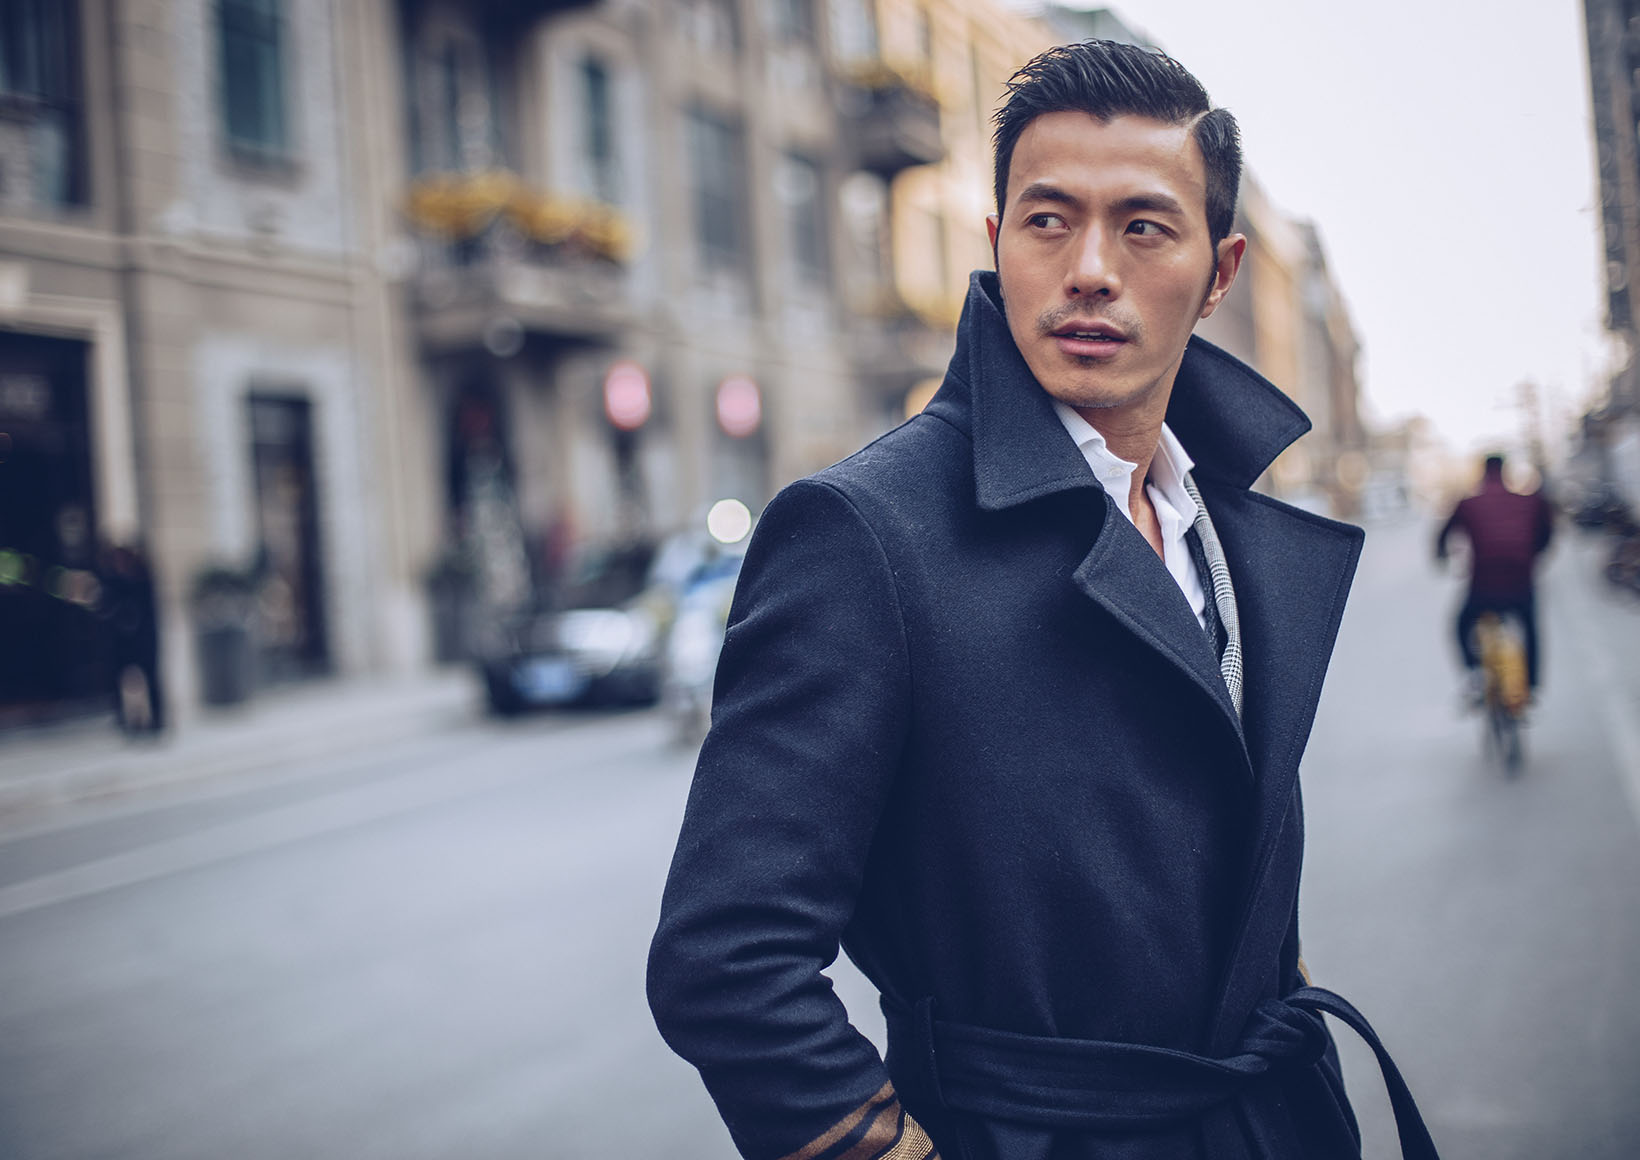 Asian male on a city street in a trench coat